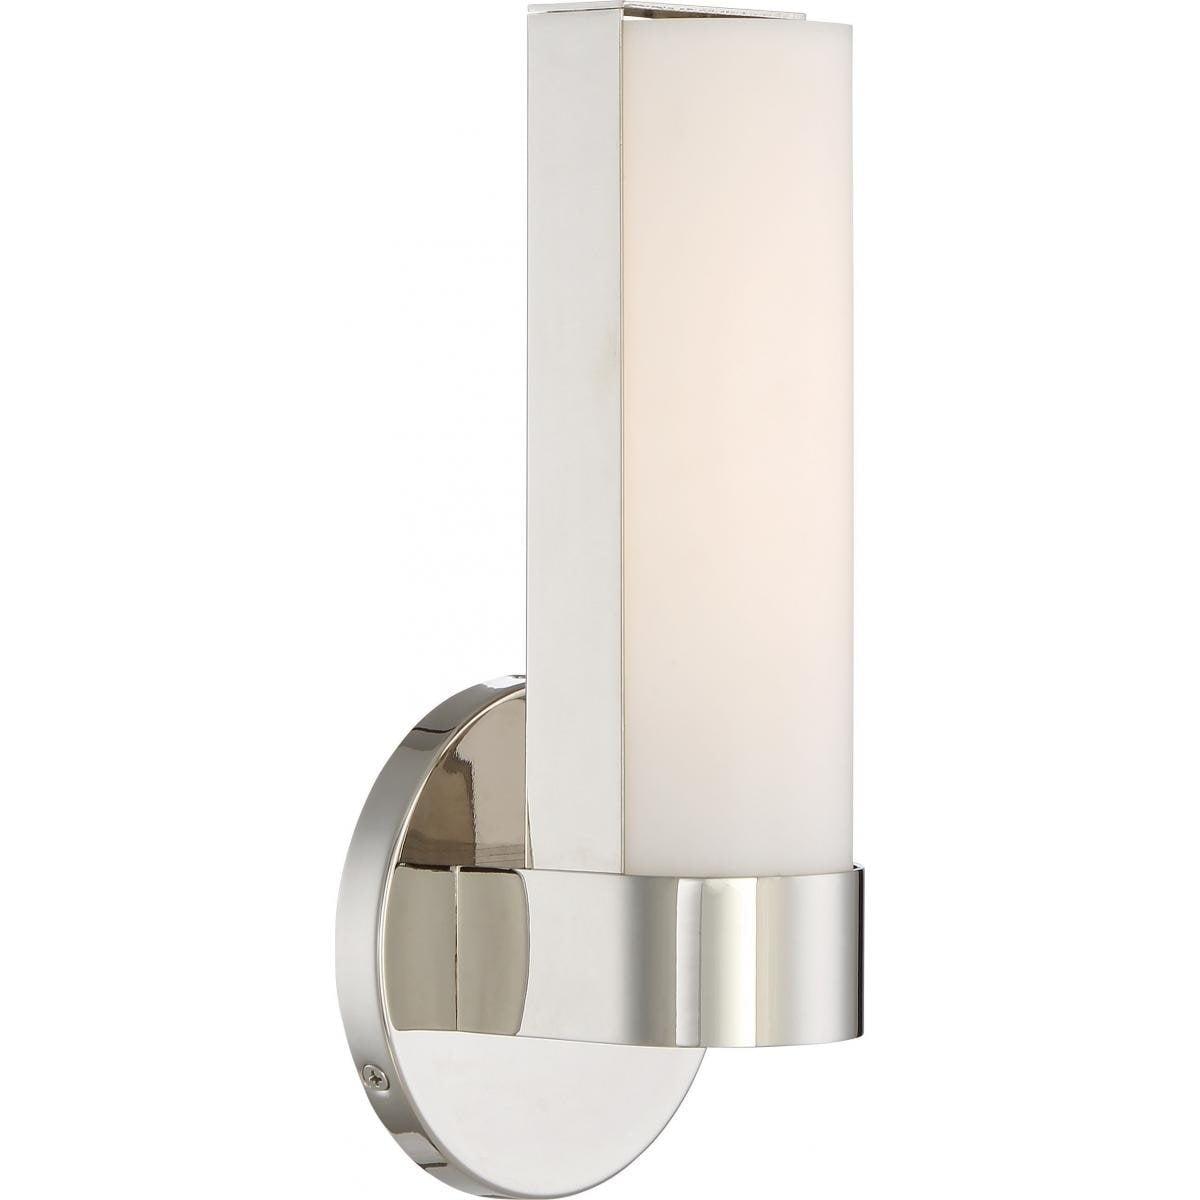 Nuvo Bond 9.5" Nickel Dimmable LED Vanity Light